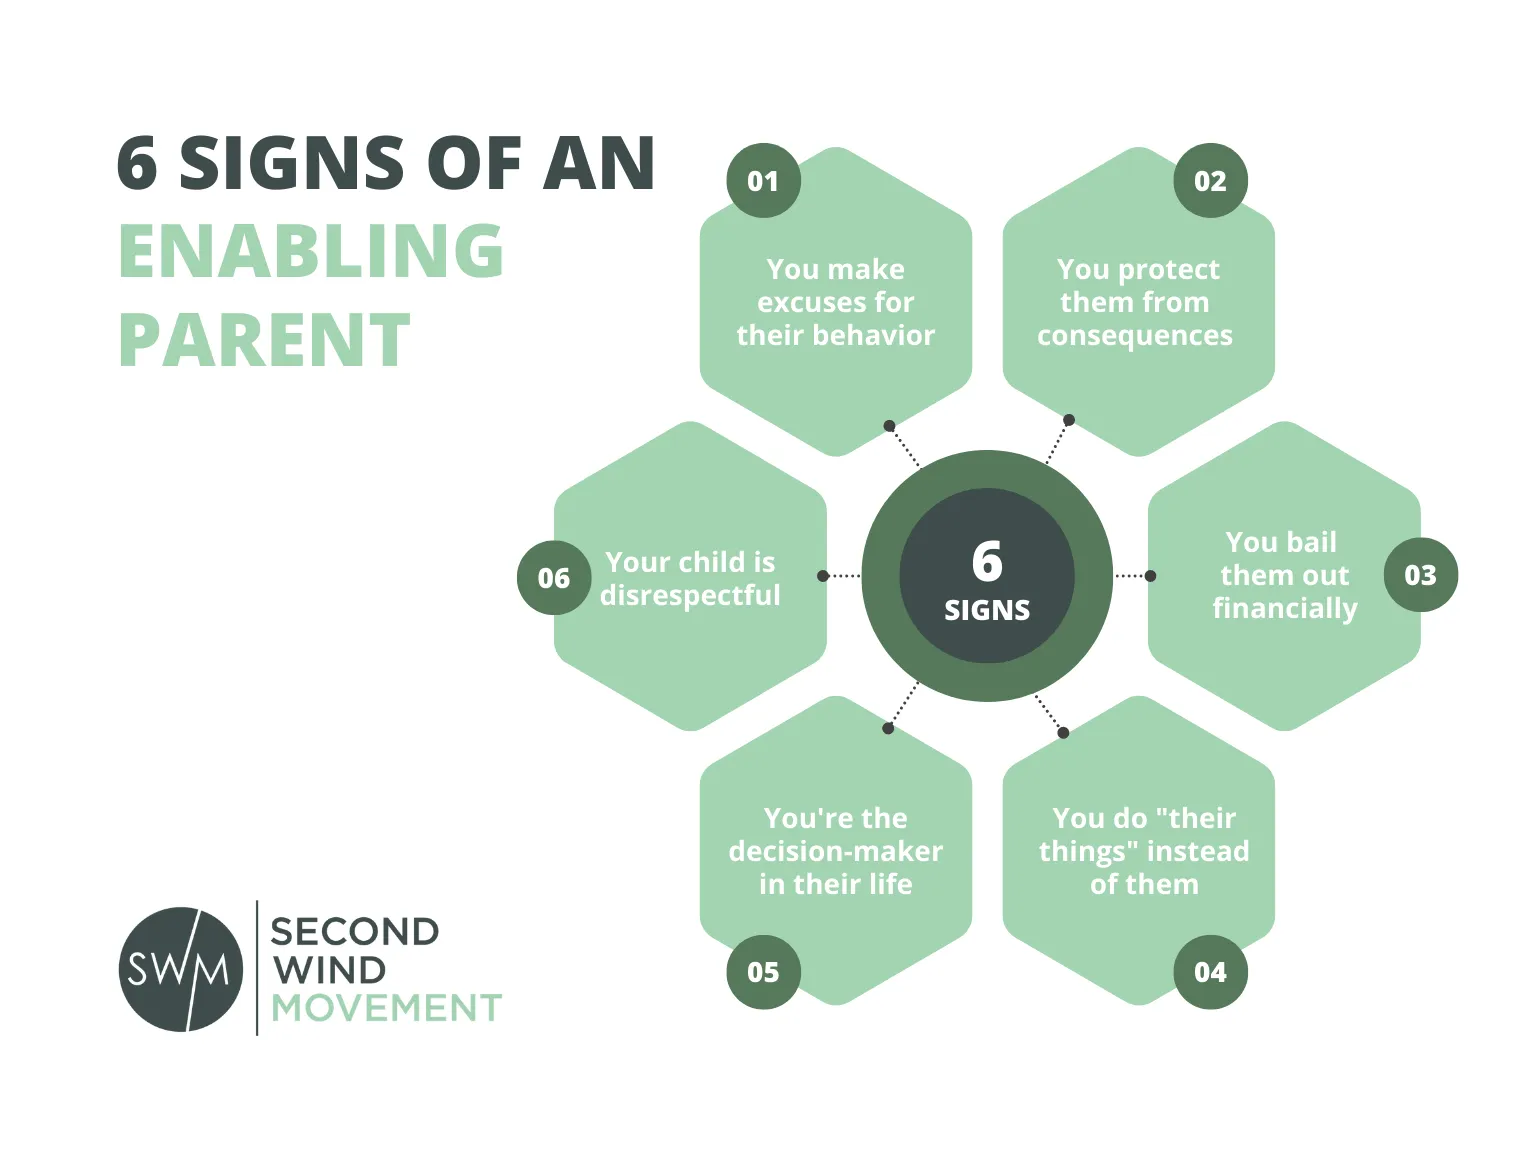 6 signs of an enabling parent